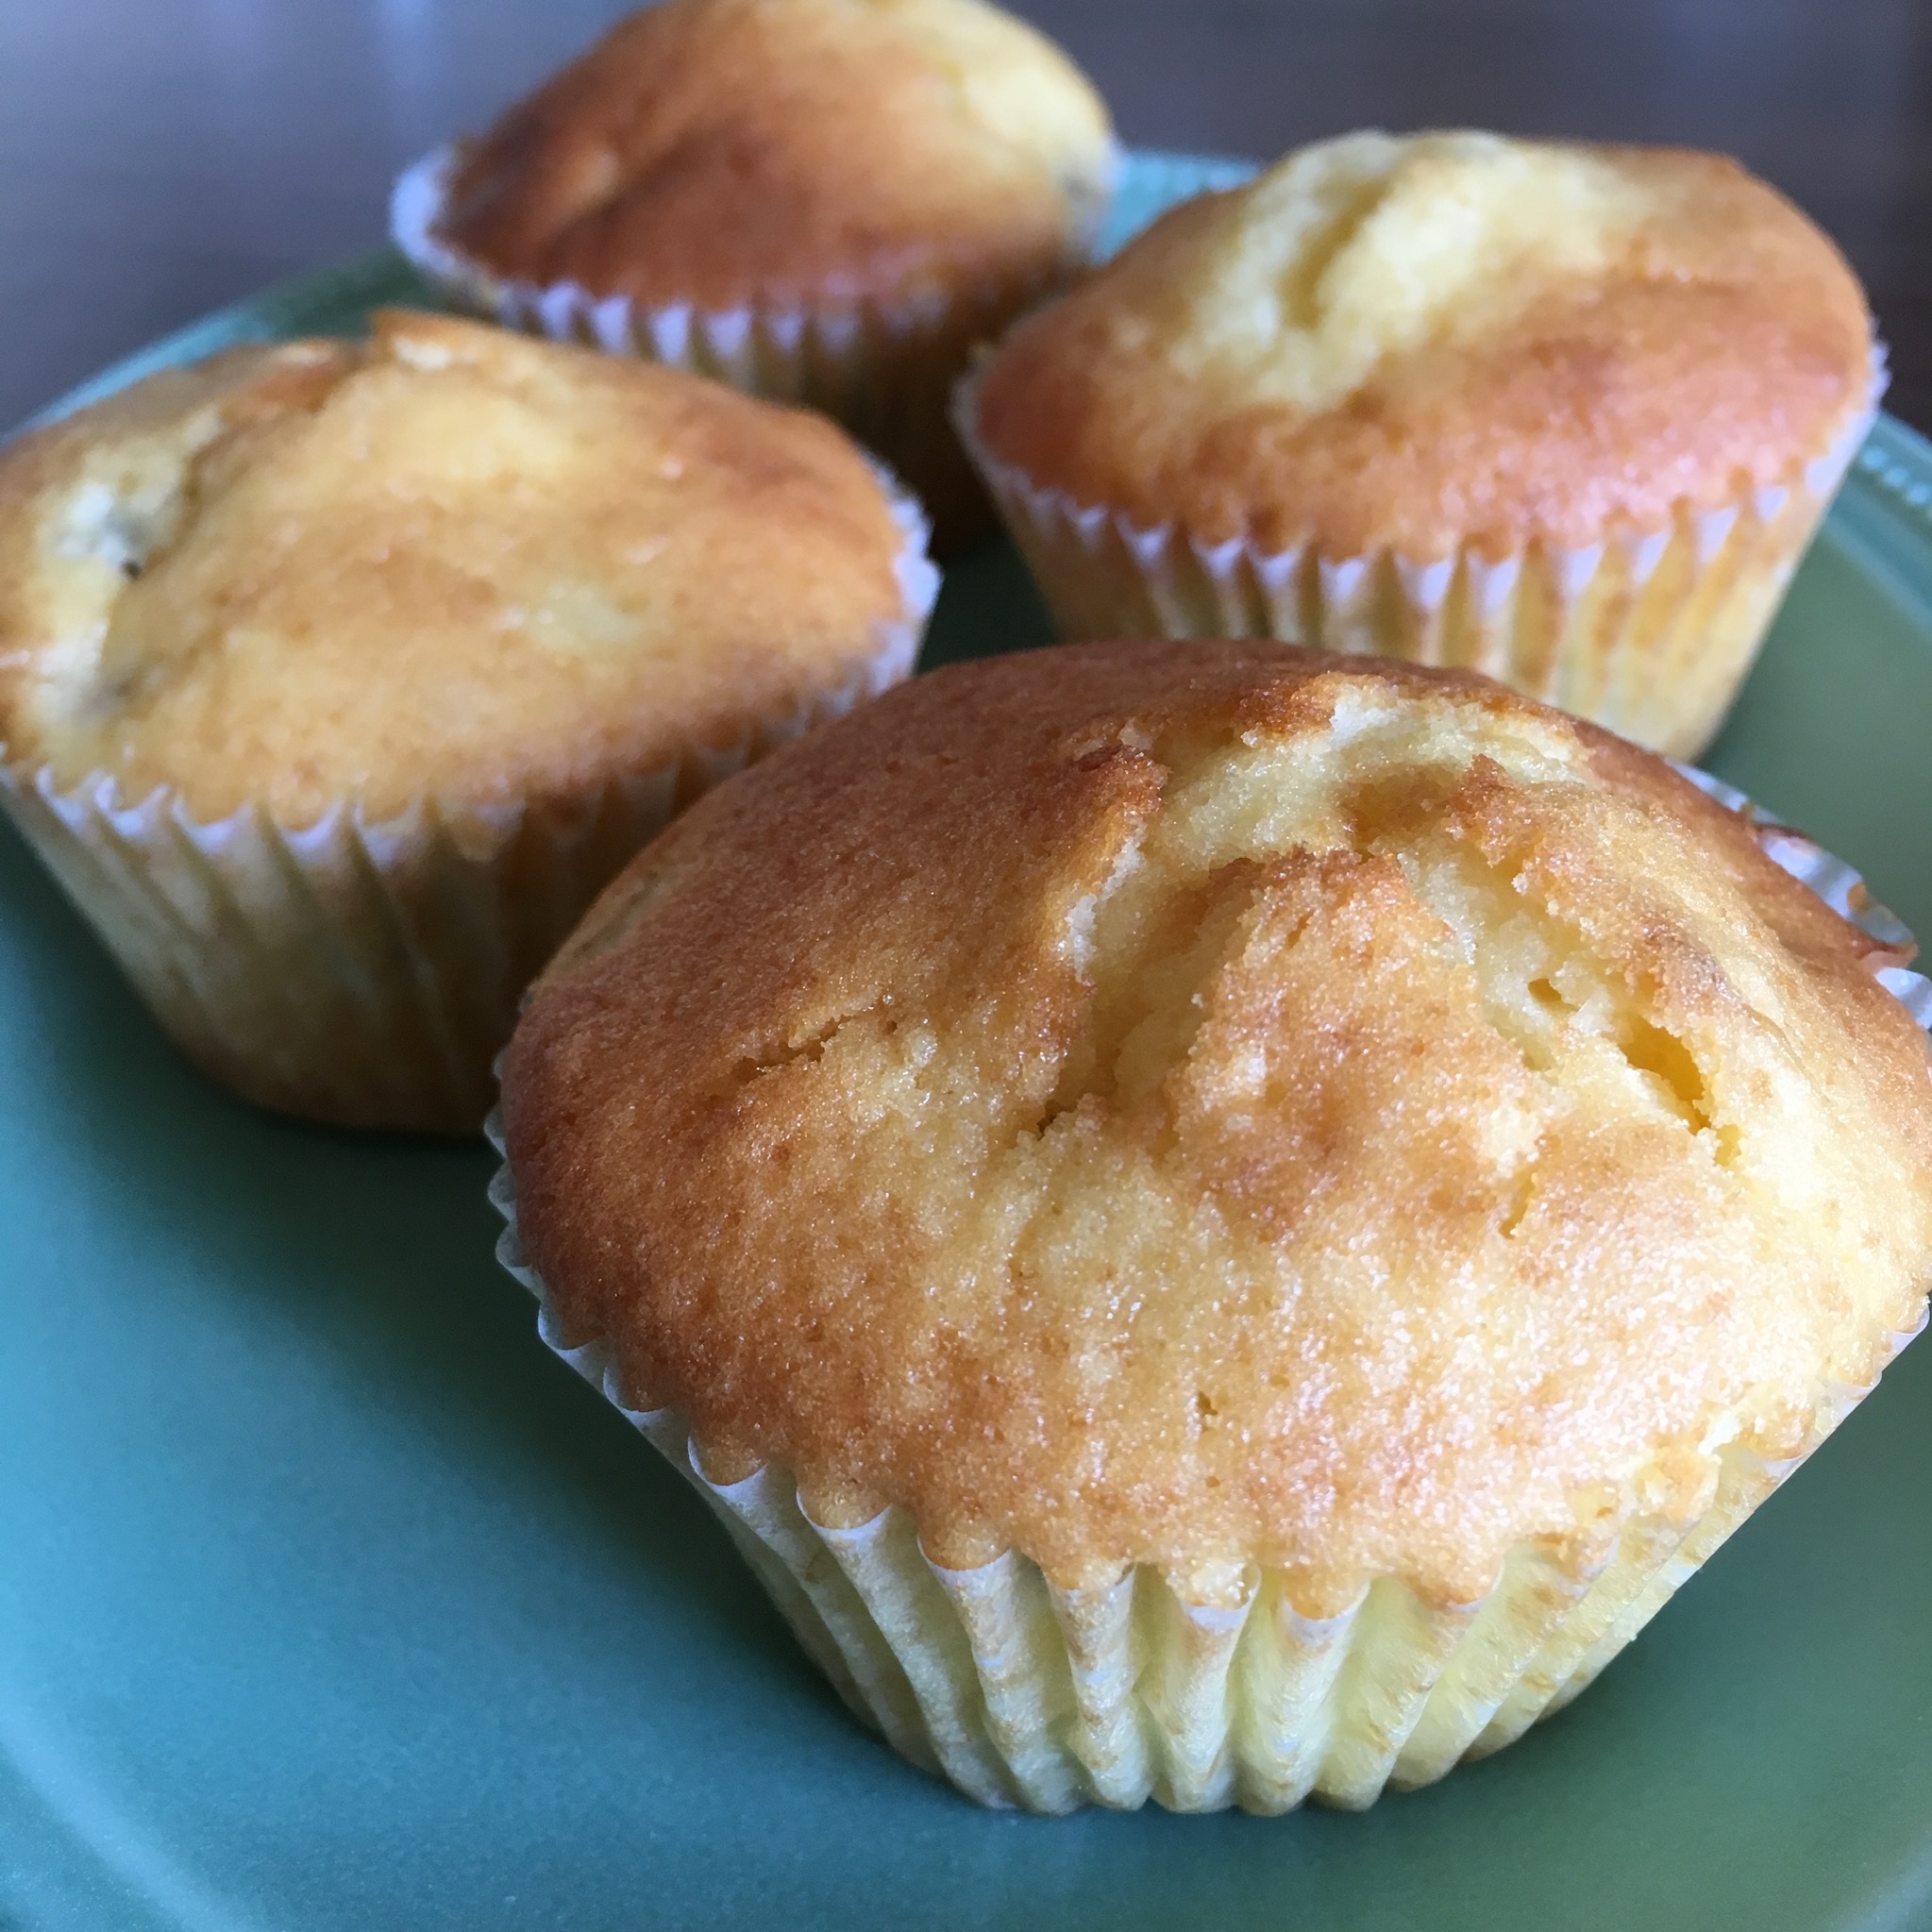 A muffin with the rich sweetness and aroma of ripe bananas. It’s not difficult to make. It is a menu